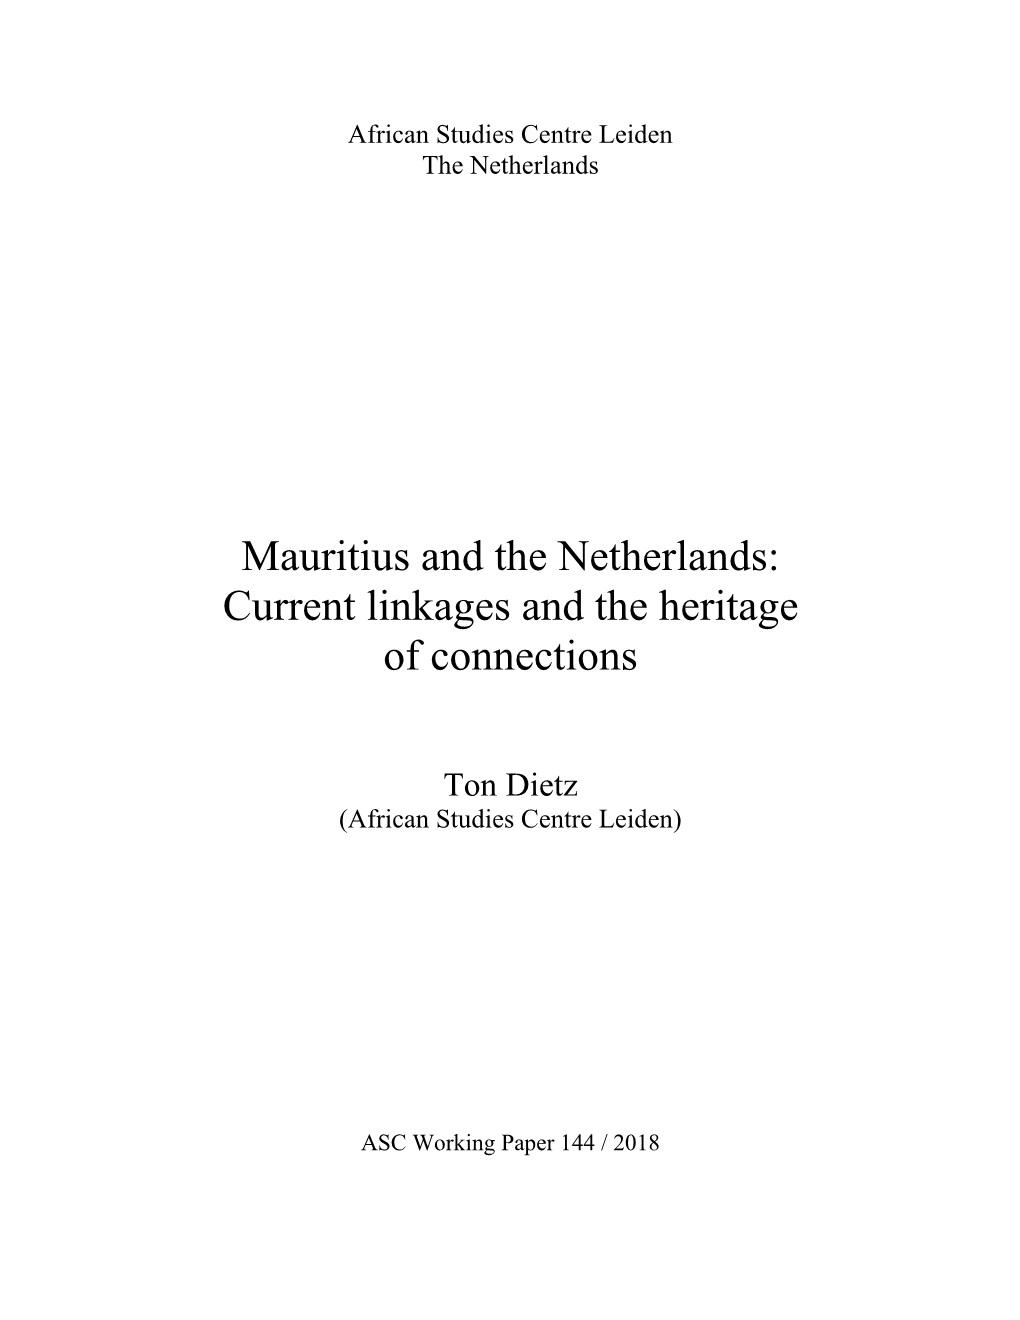 Mauritius and the Netherlands: Current Linkages and the Heritage of Connections